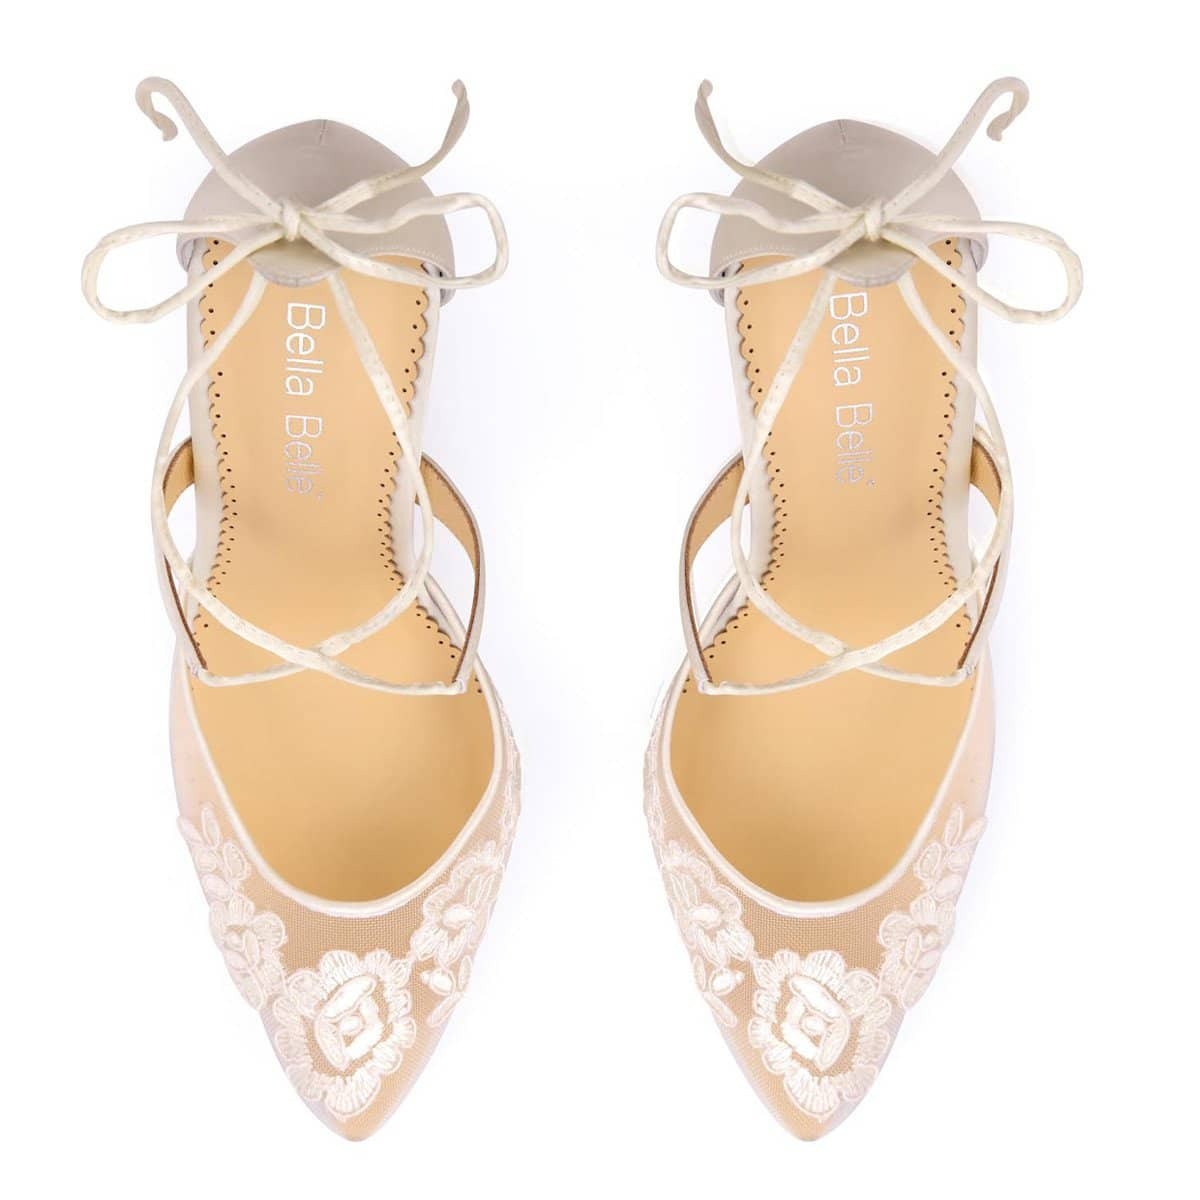 Anita Lace Wedding Shoes in Ivory